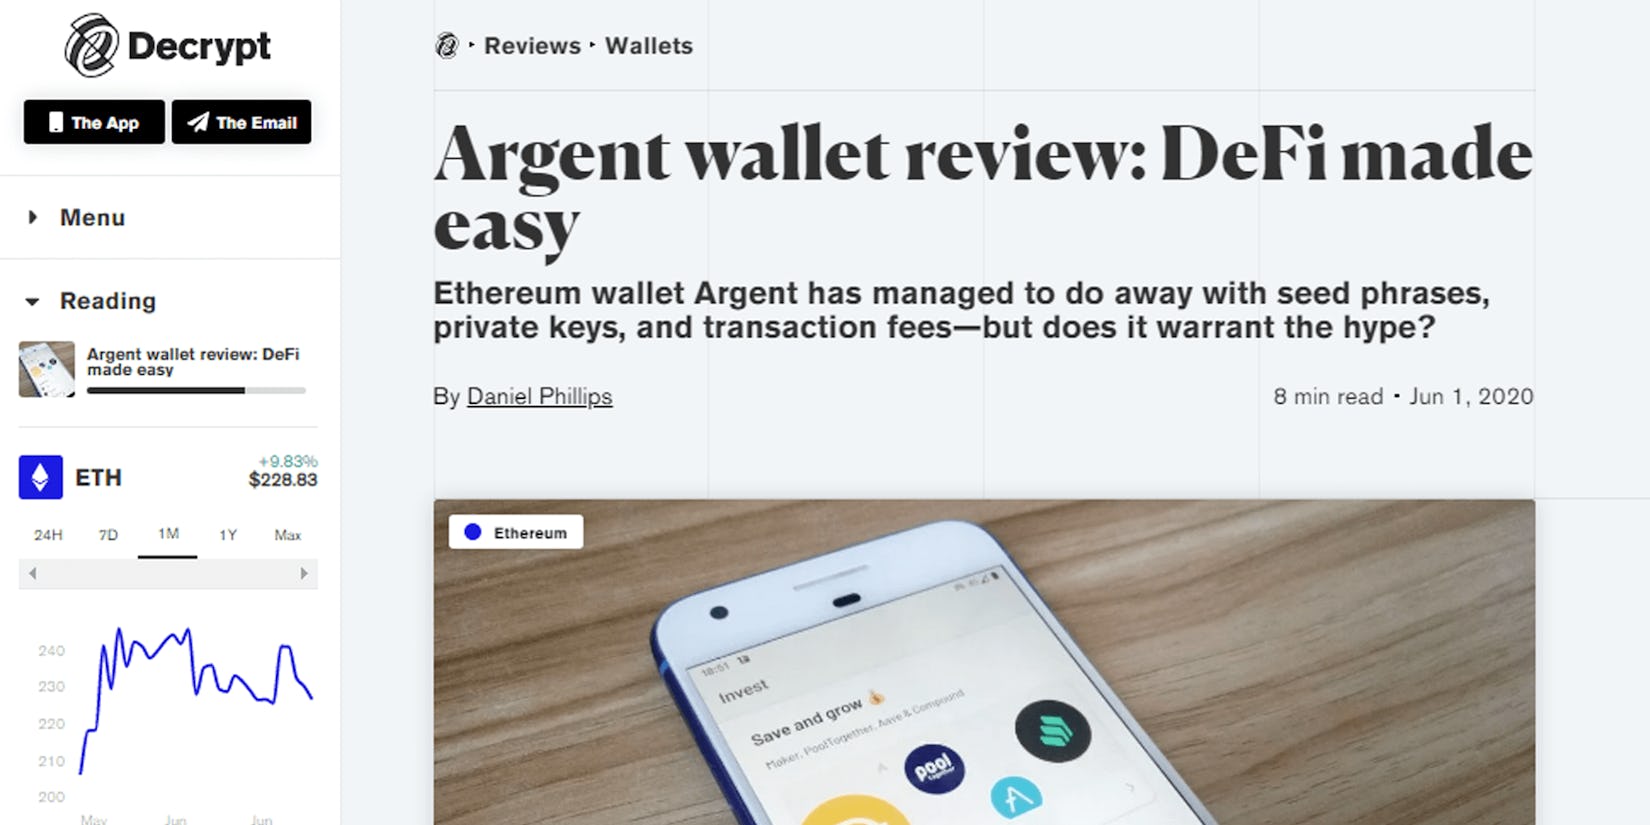 Decrypt on how the Argent wallet is DeFi made easy